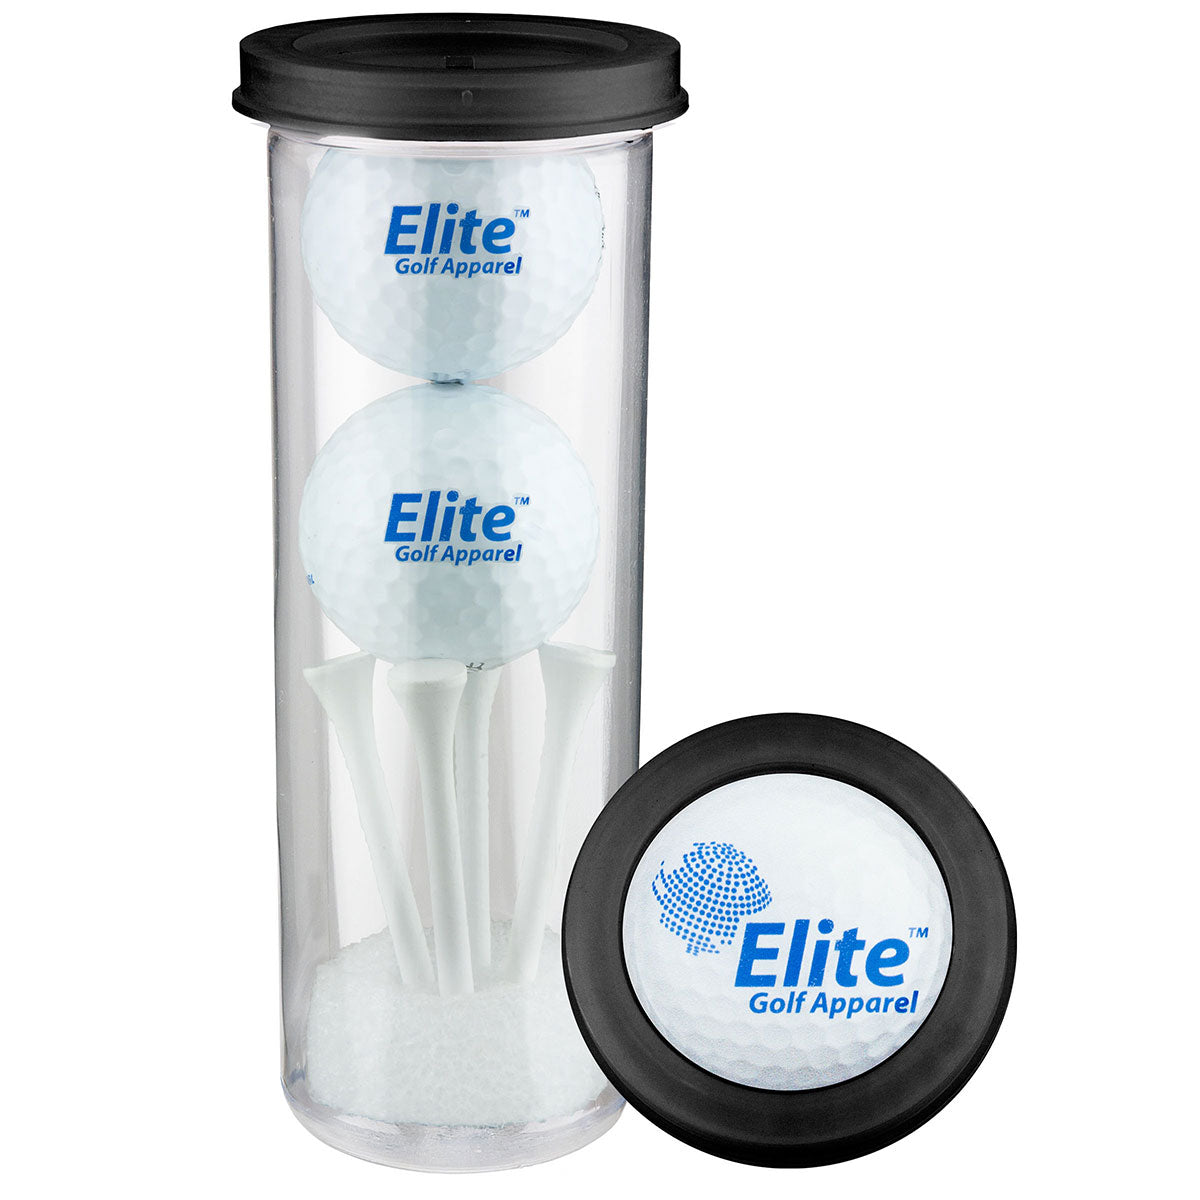 Value Golf Gift Tube - Golf Balls and tees with domed Imprint